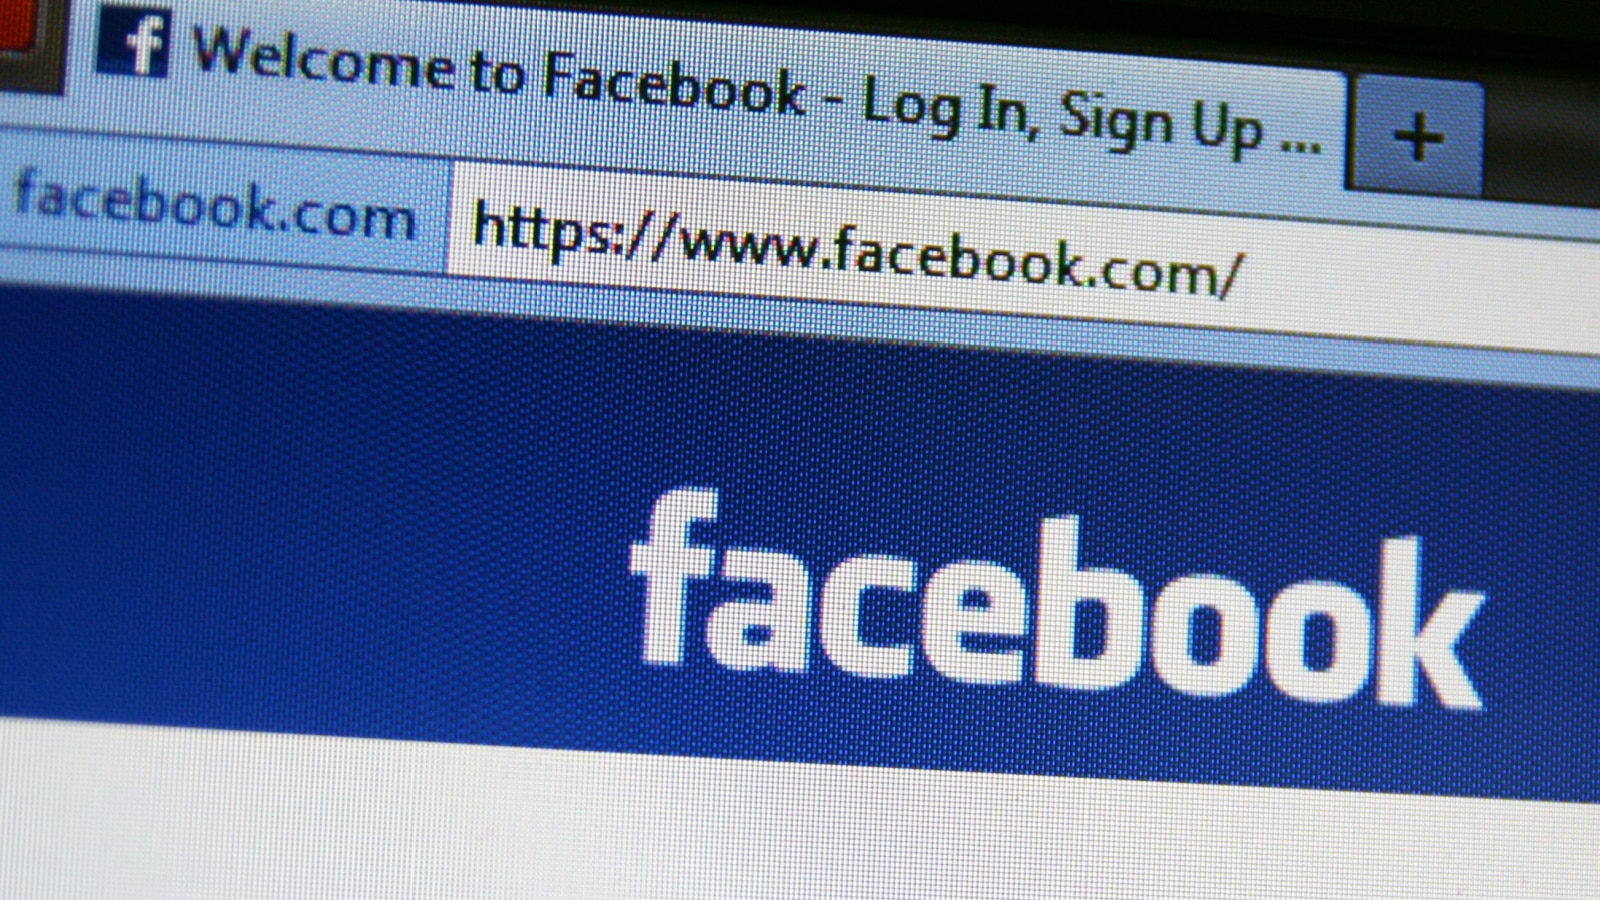 PALO ALTO, CA - DEC 16: Facebook's massive overhaul to user profiles, dubbed Timeline, is now available for the social networks more than 800 million users worldwide on Dec 16, 2011 in Palo Alto, Ca